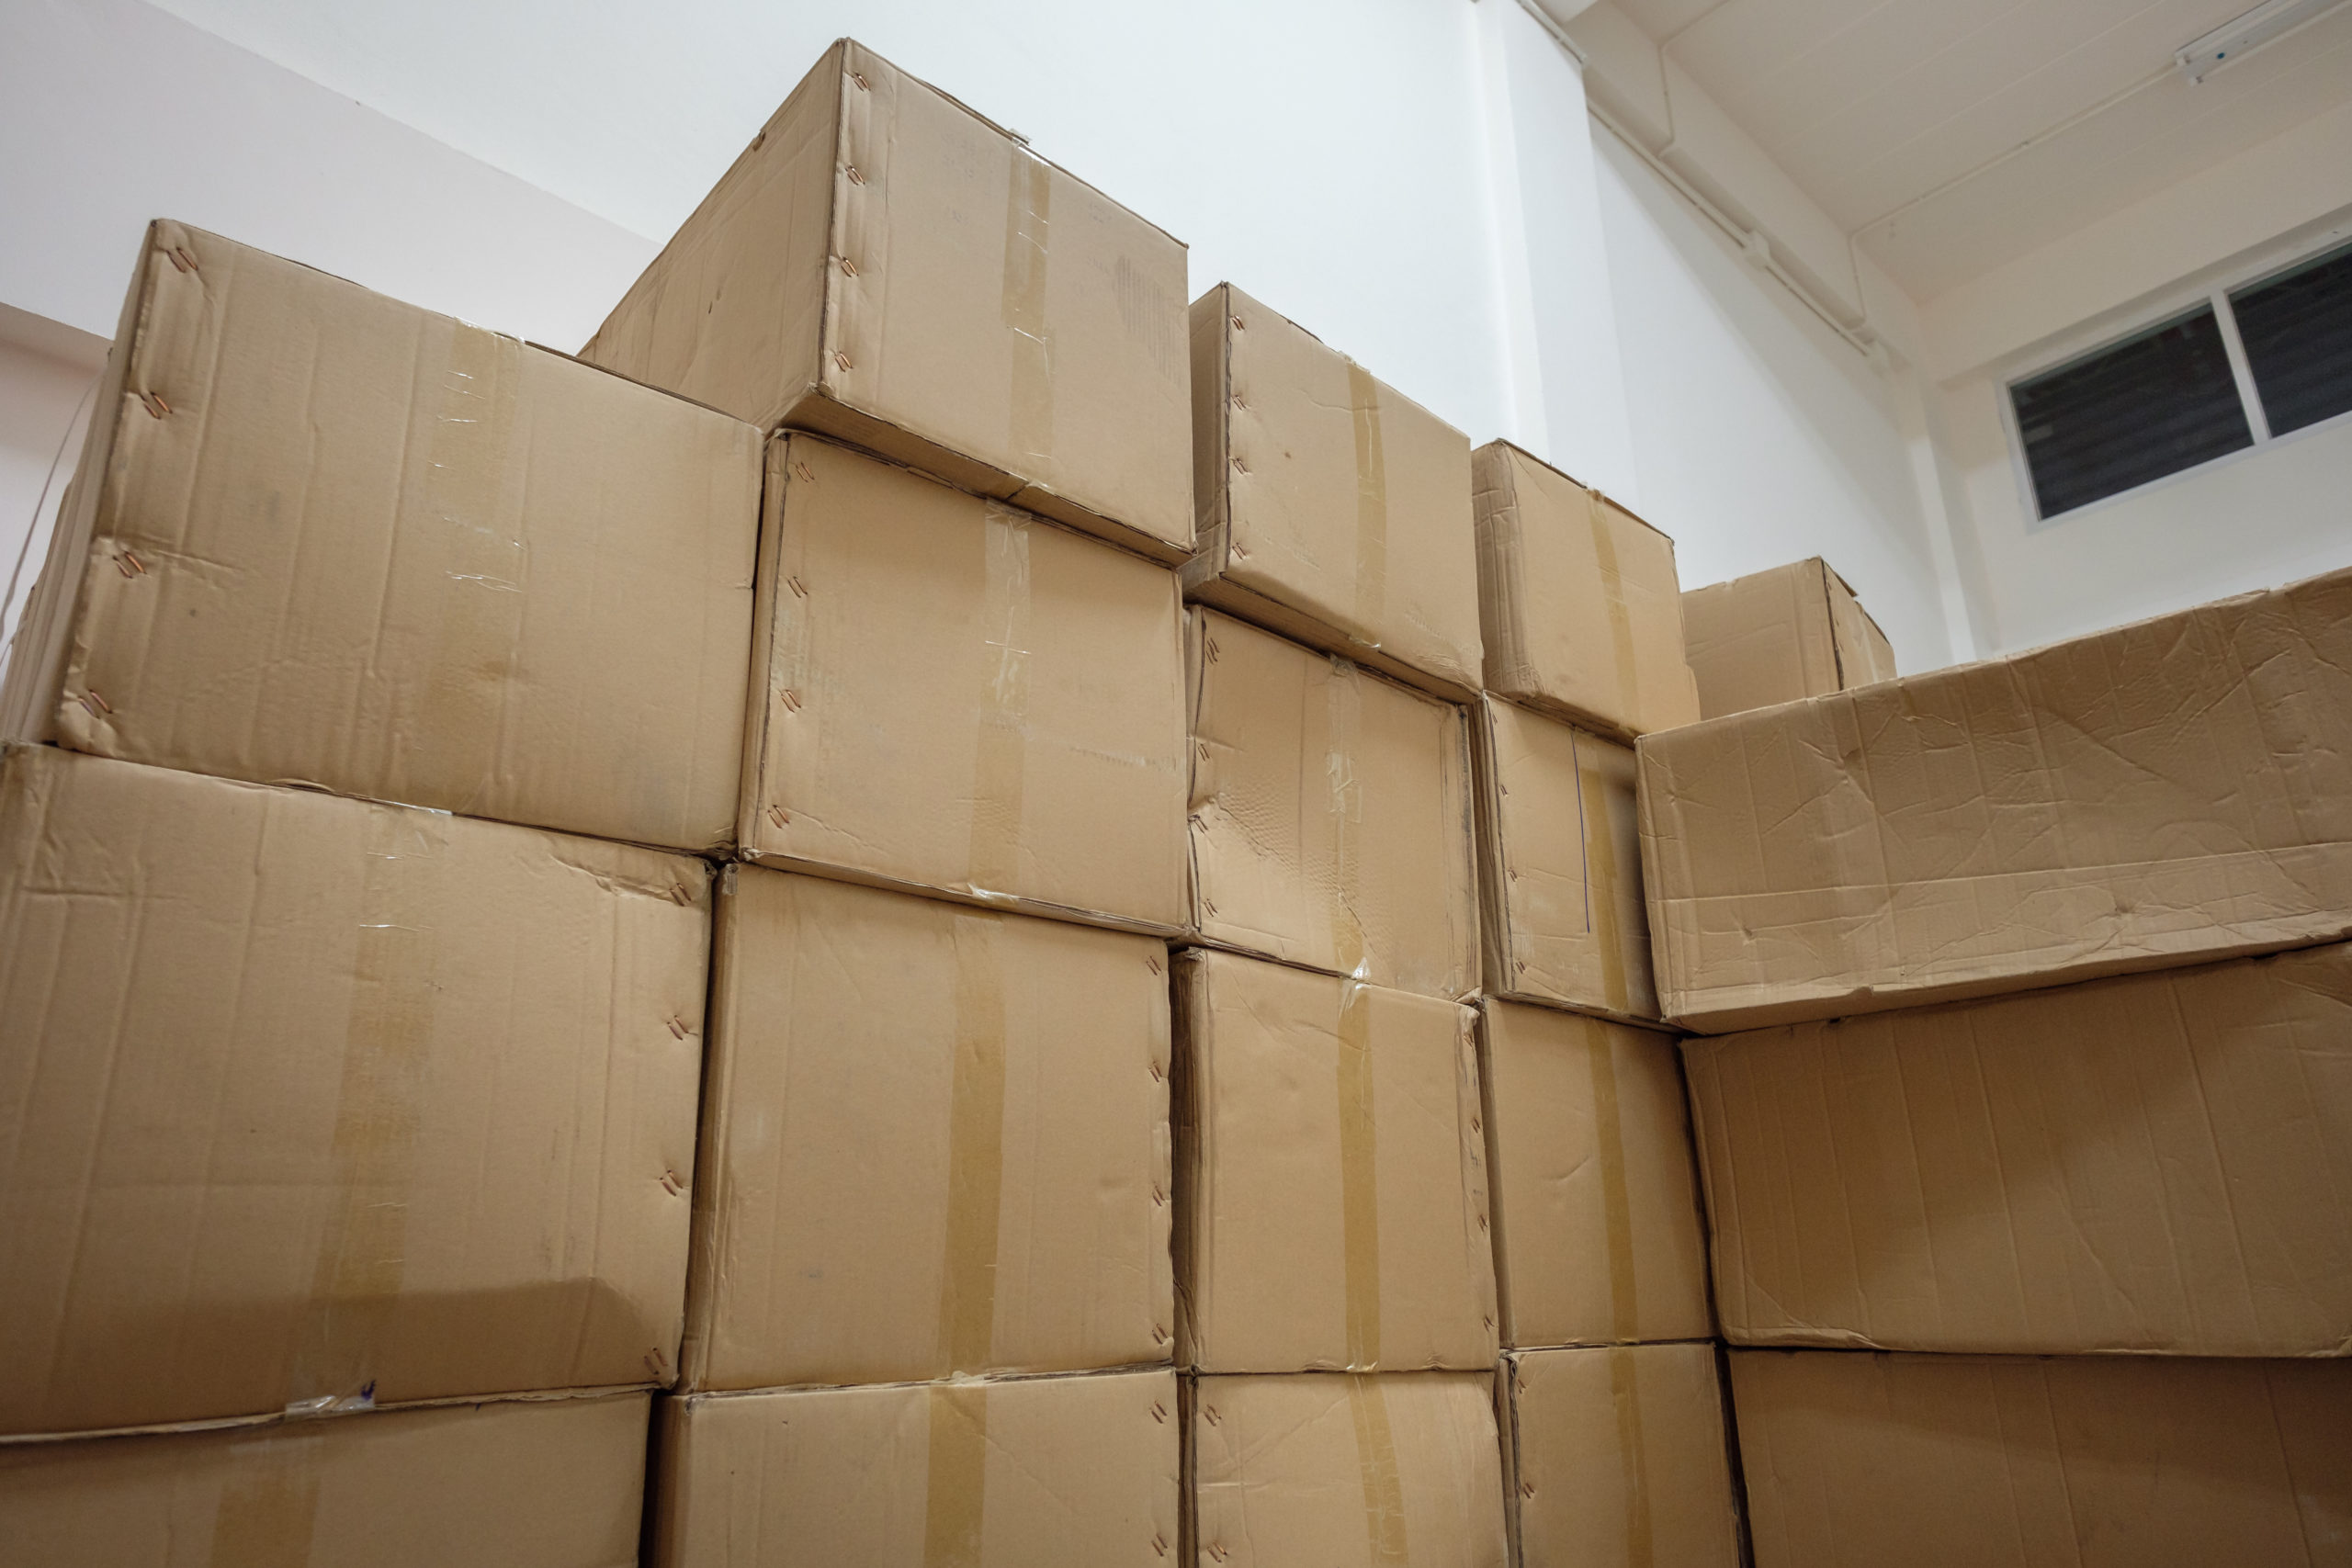 Cardboard storage boxes stacked